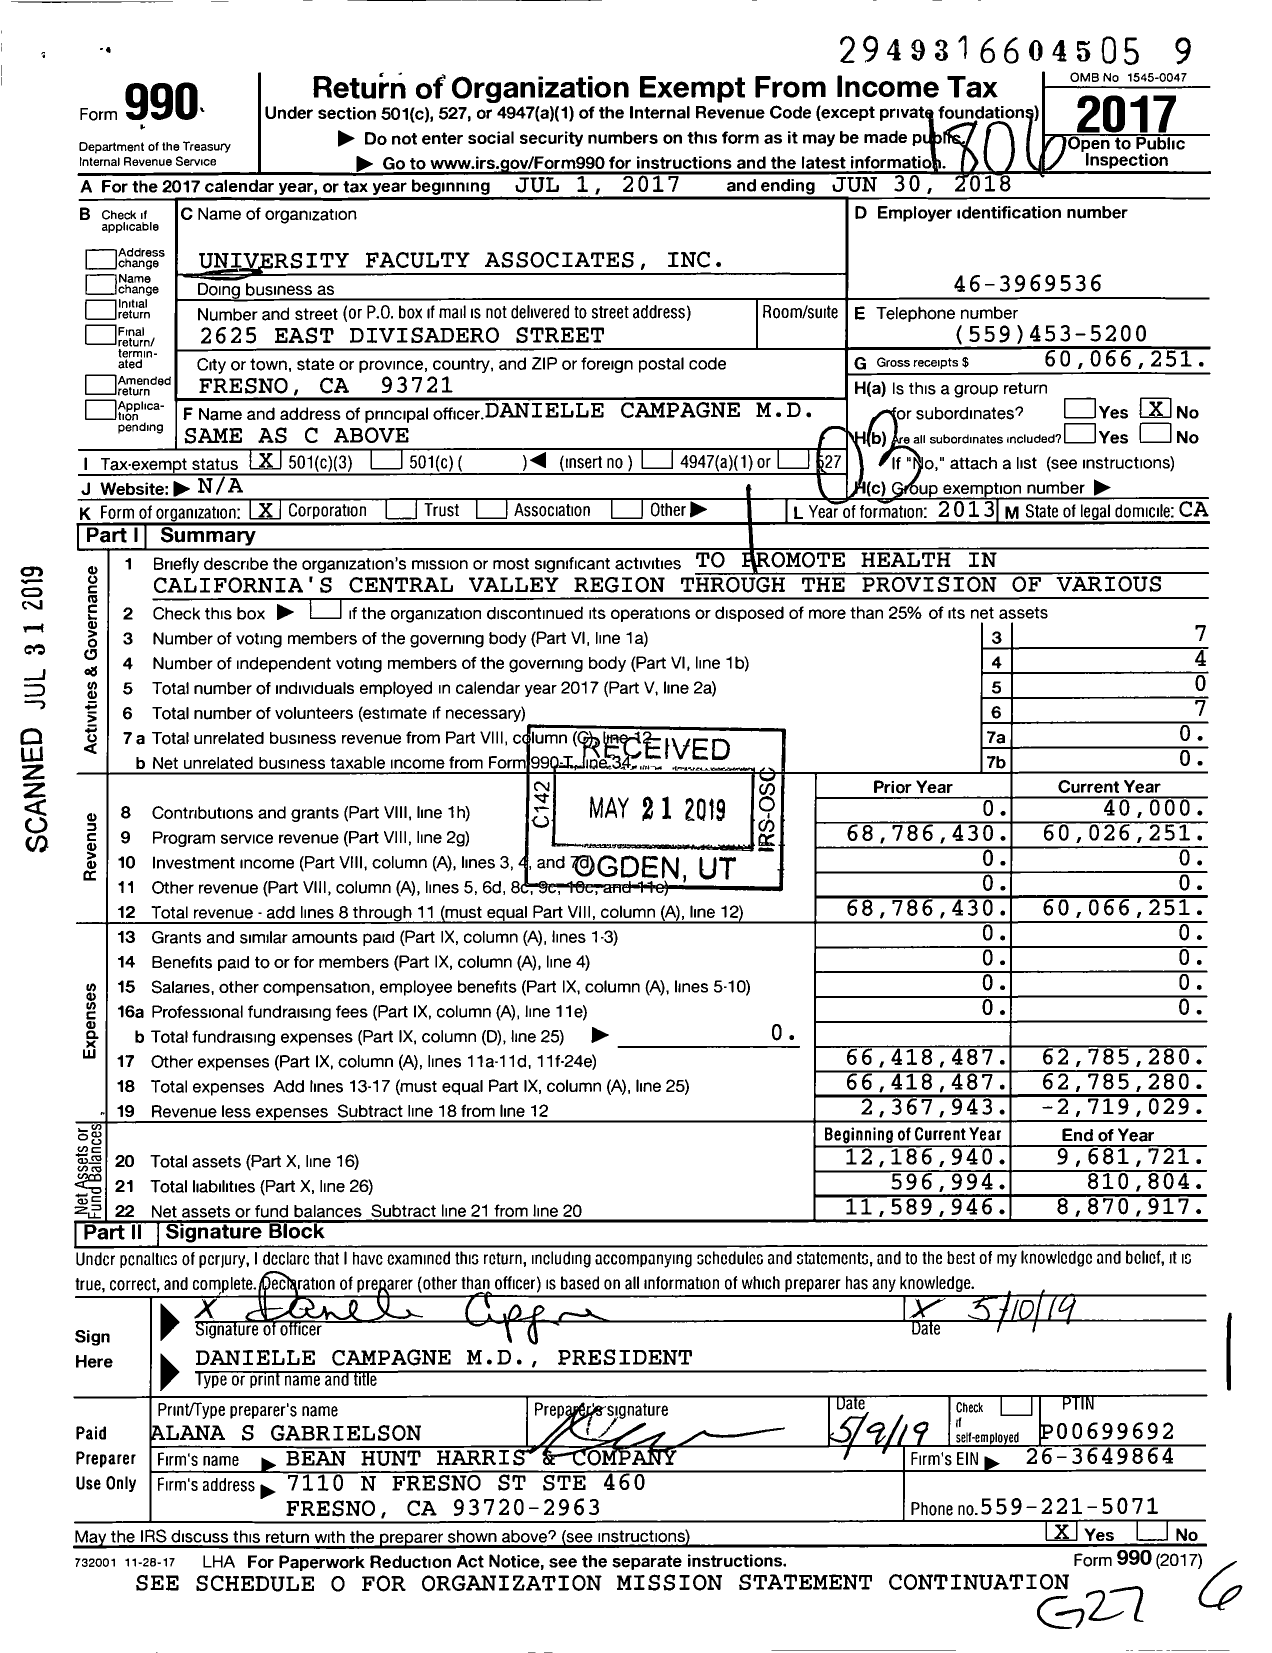 Image of first page of 2017 Form 990 for University Faculty Associates